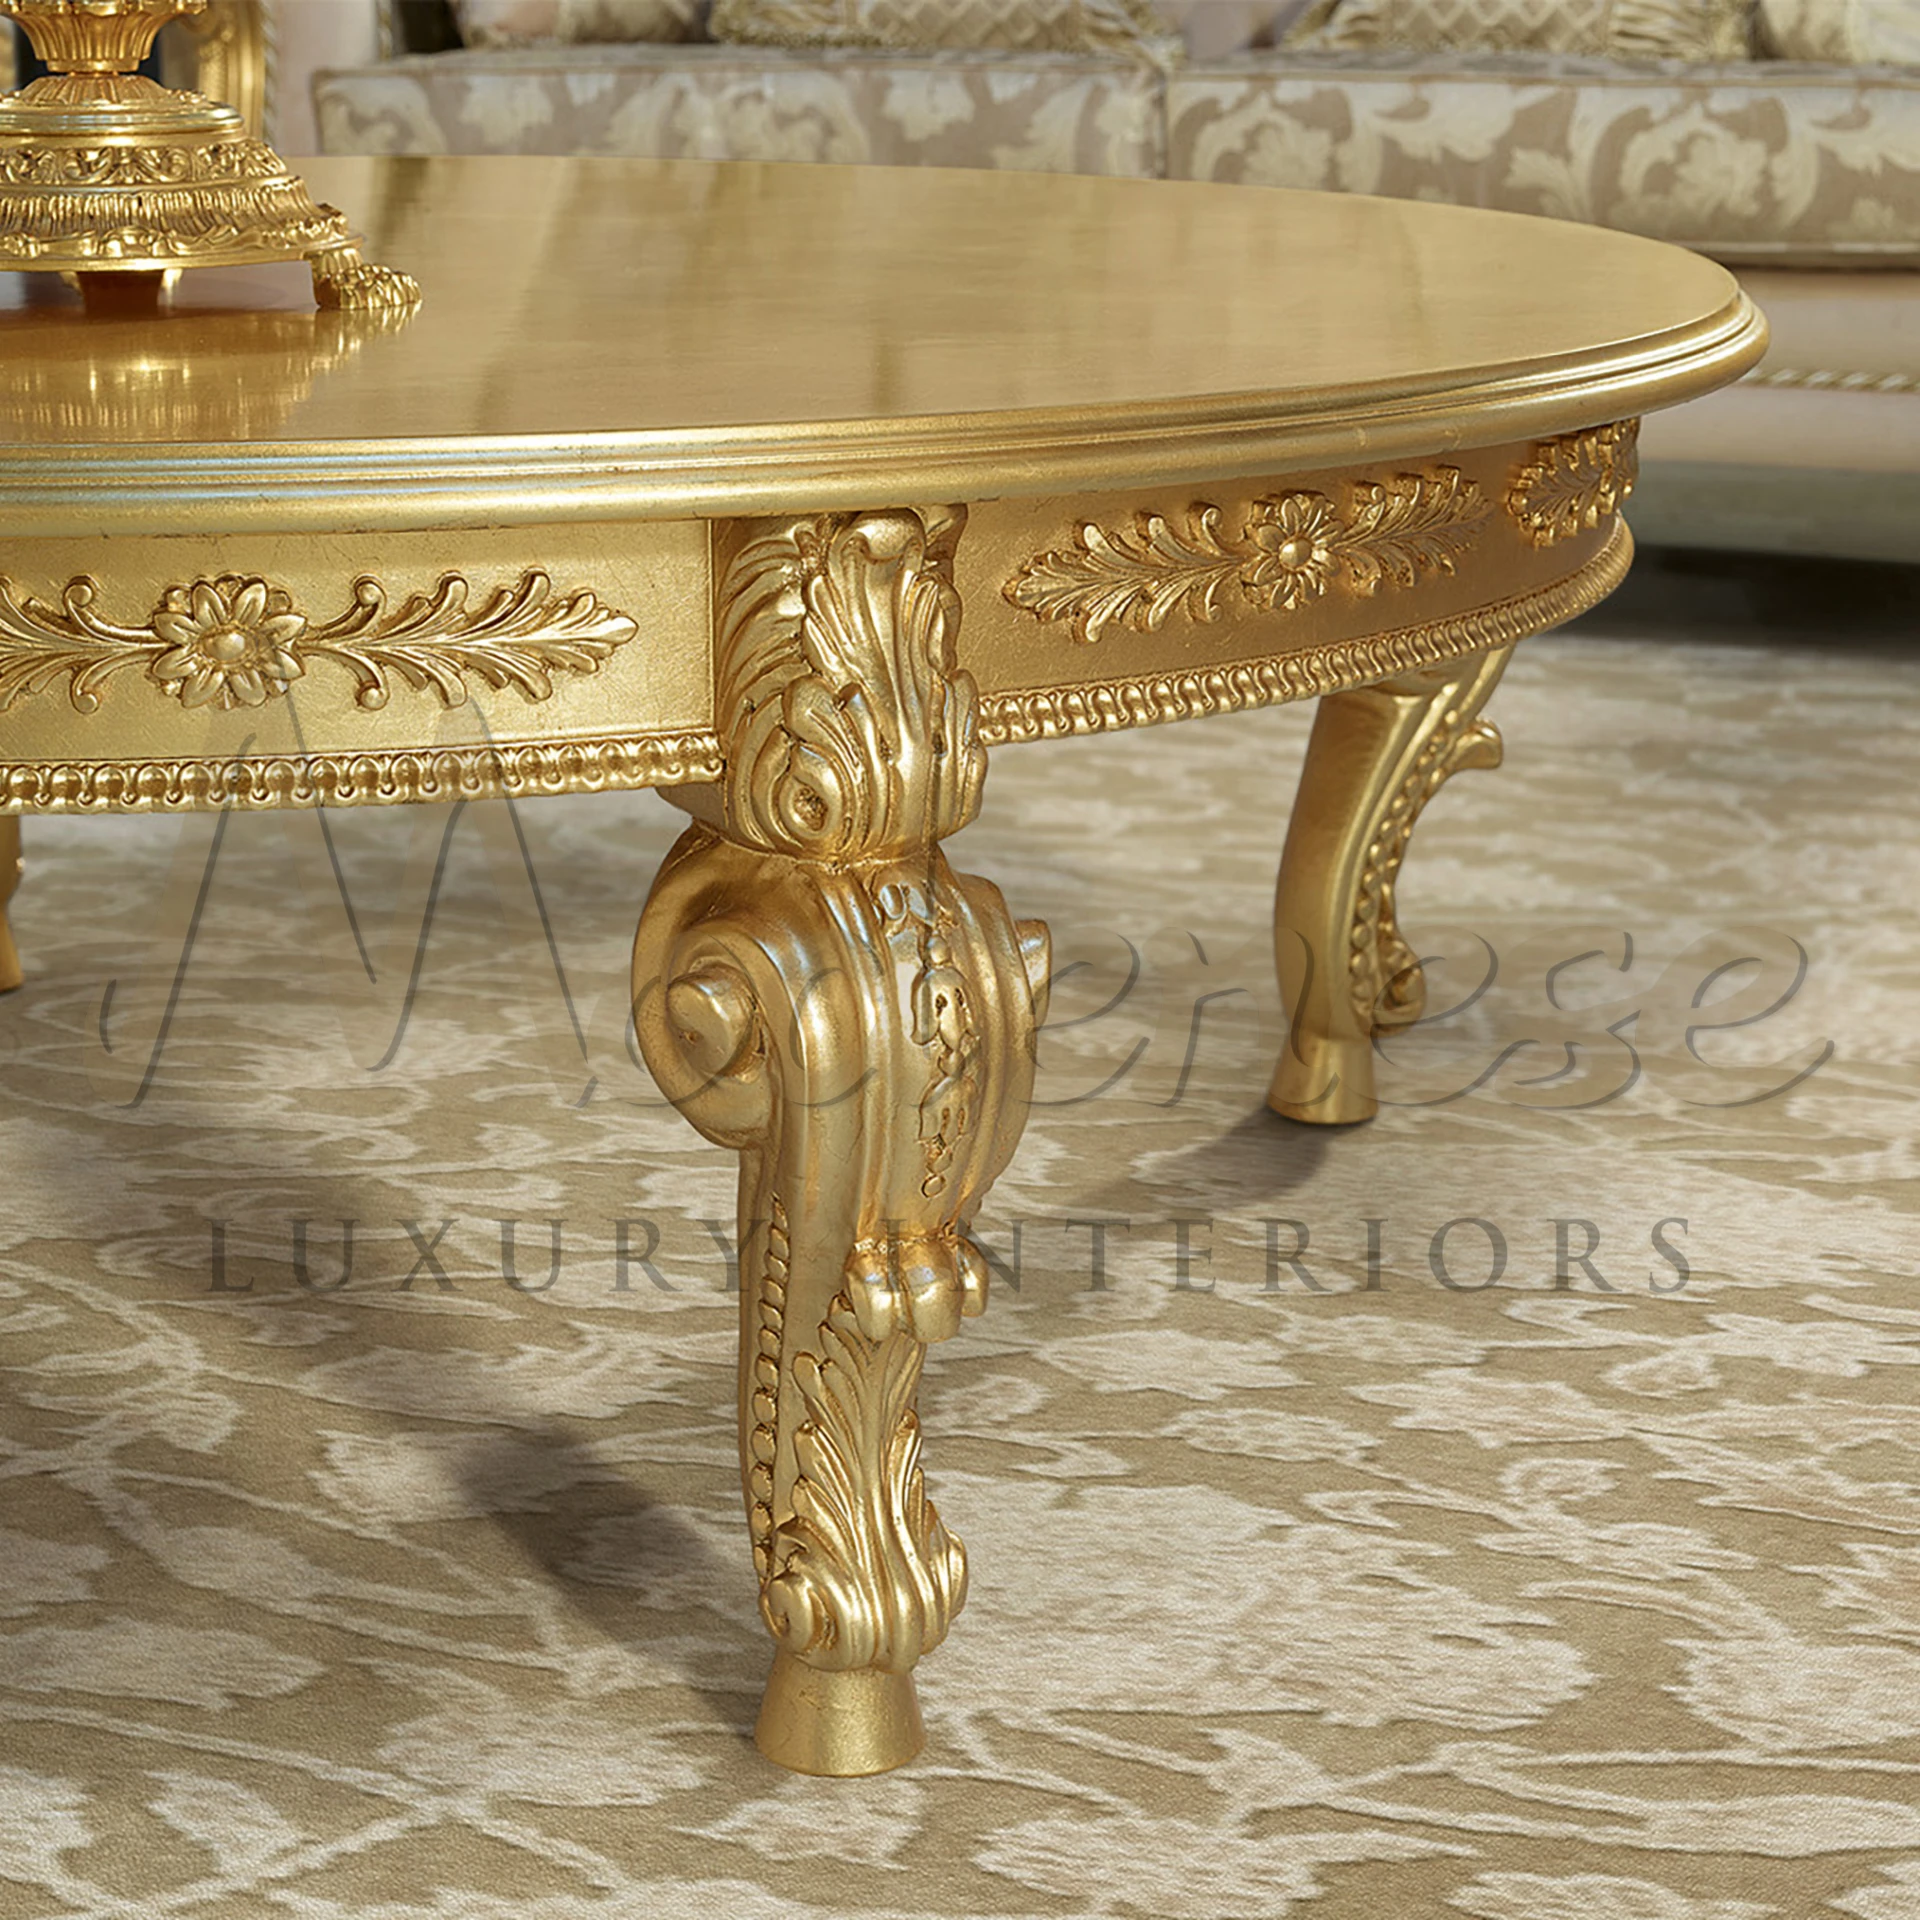 Exquisite Gilded Baroque Coffee Table: A Symbol of Opulence and Style